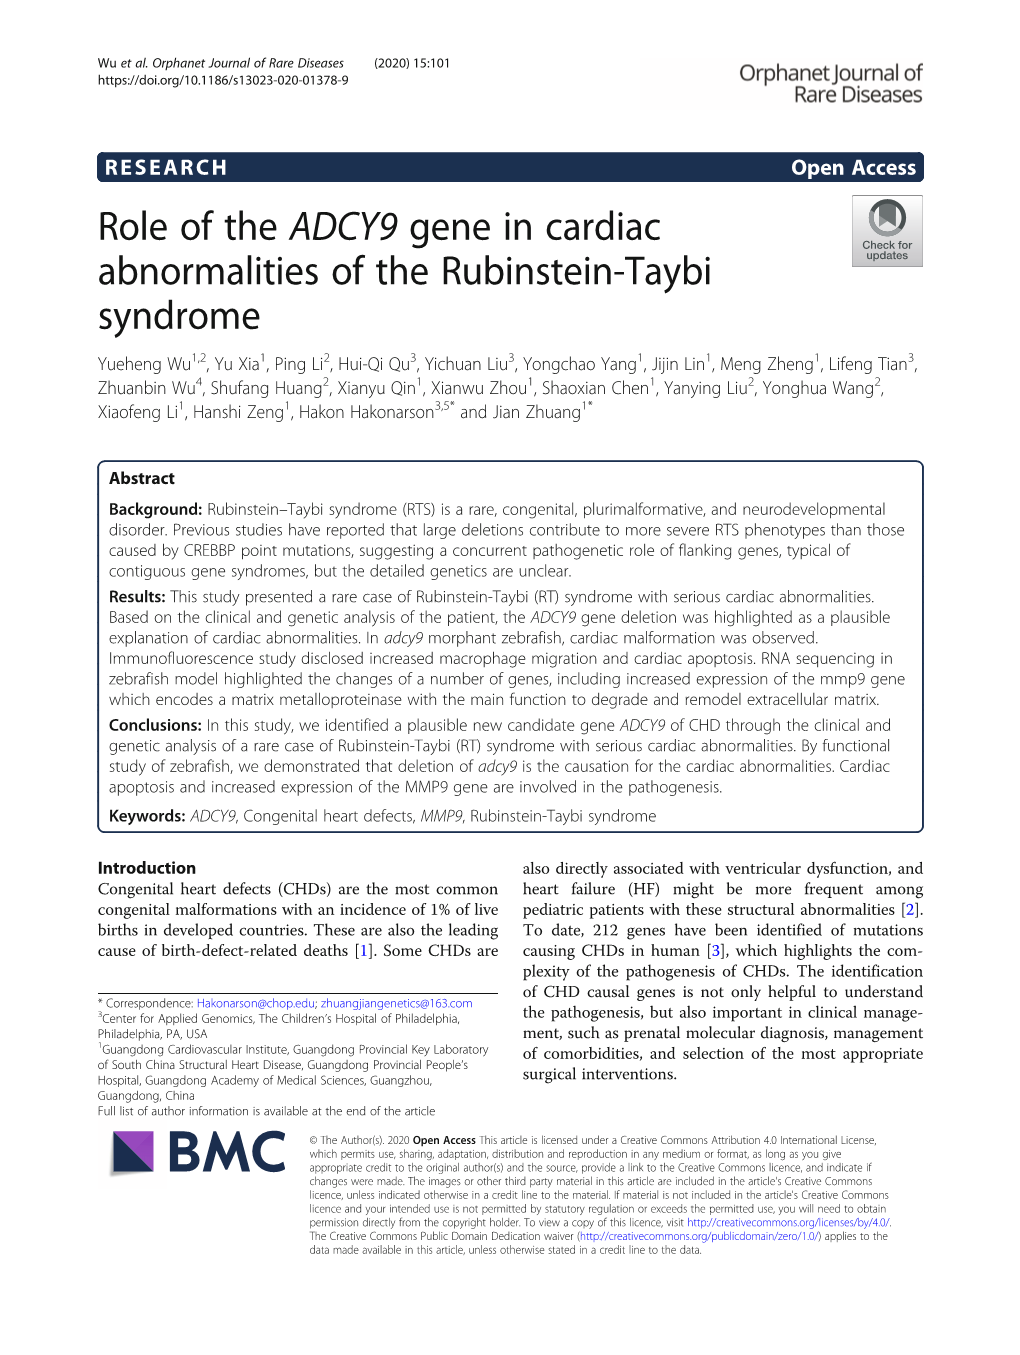 Role of the ADCY9 Gene in Cardiac Abnormalities of the Rubinstein